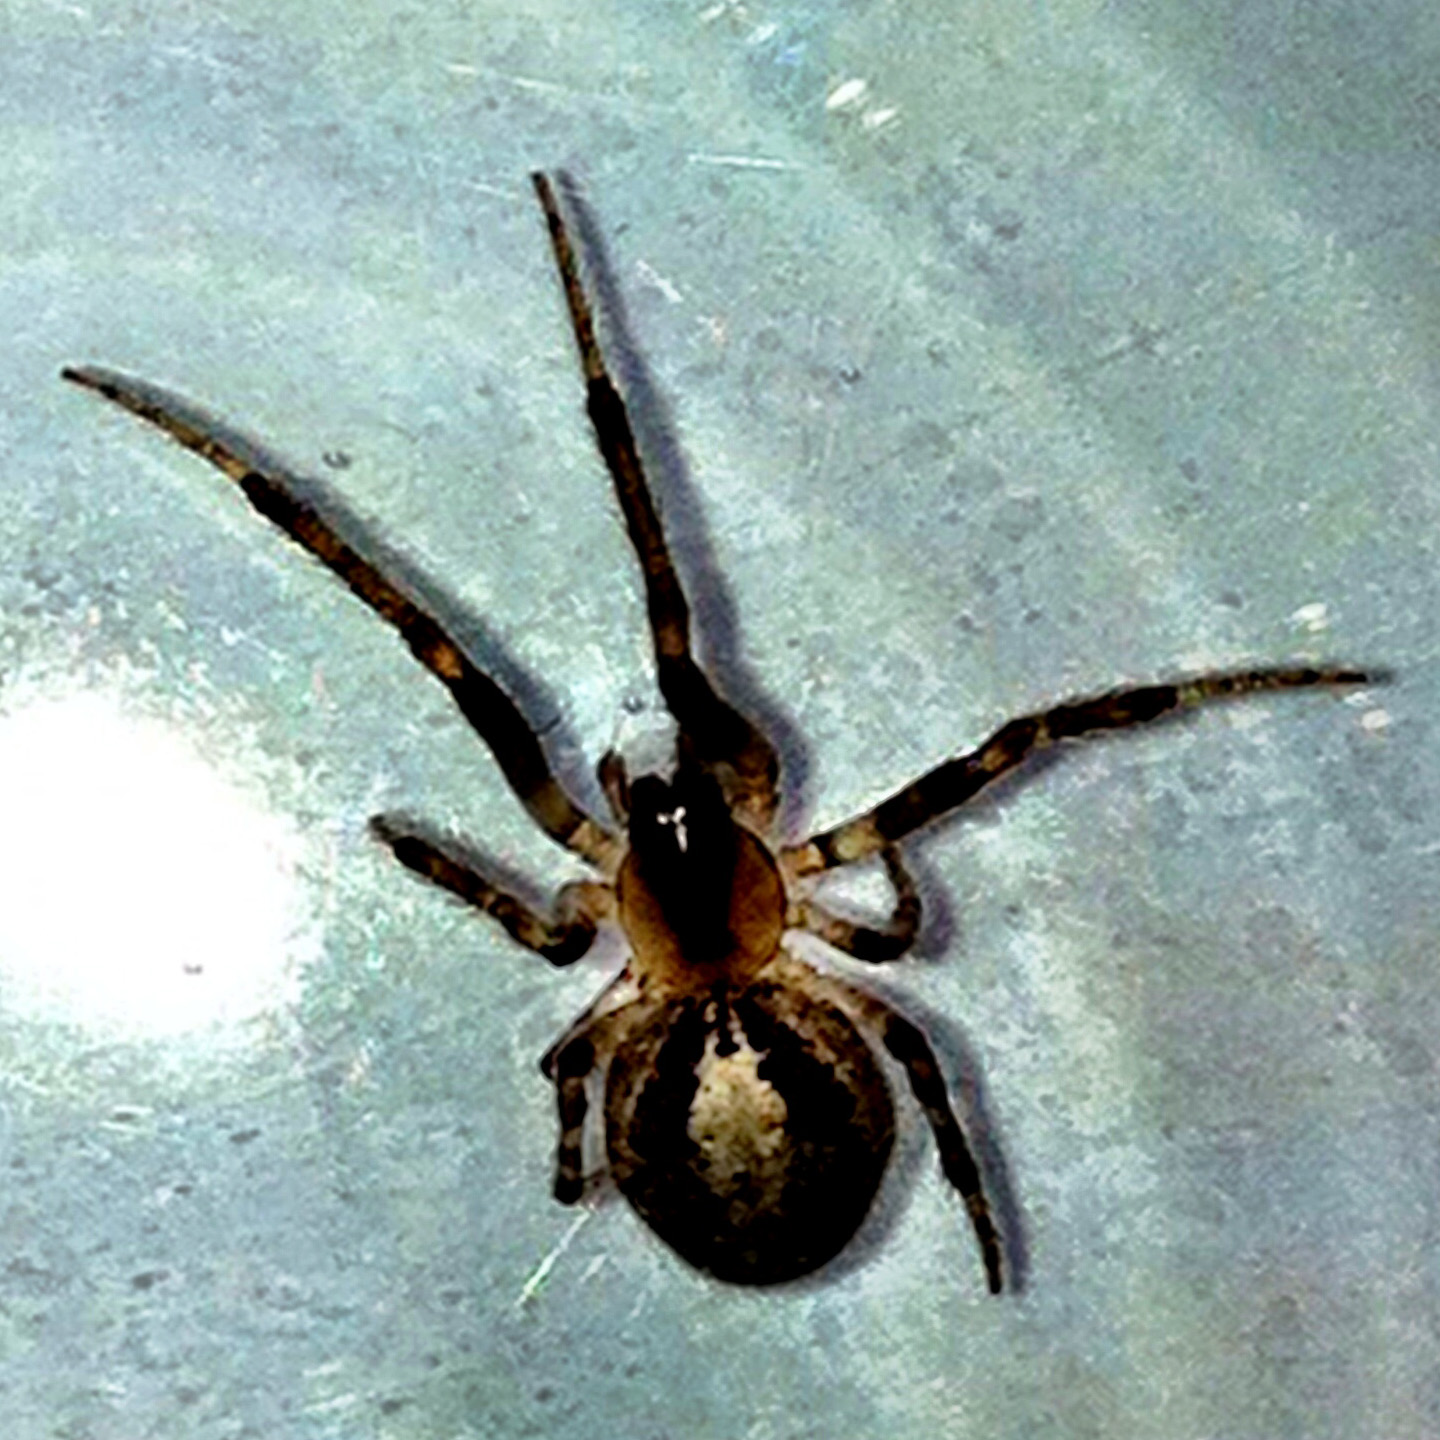 False Widow Spider Maybe?